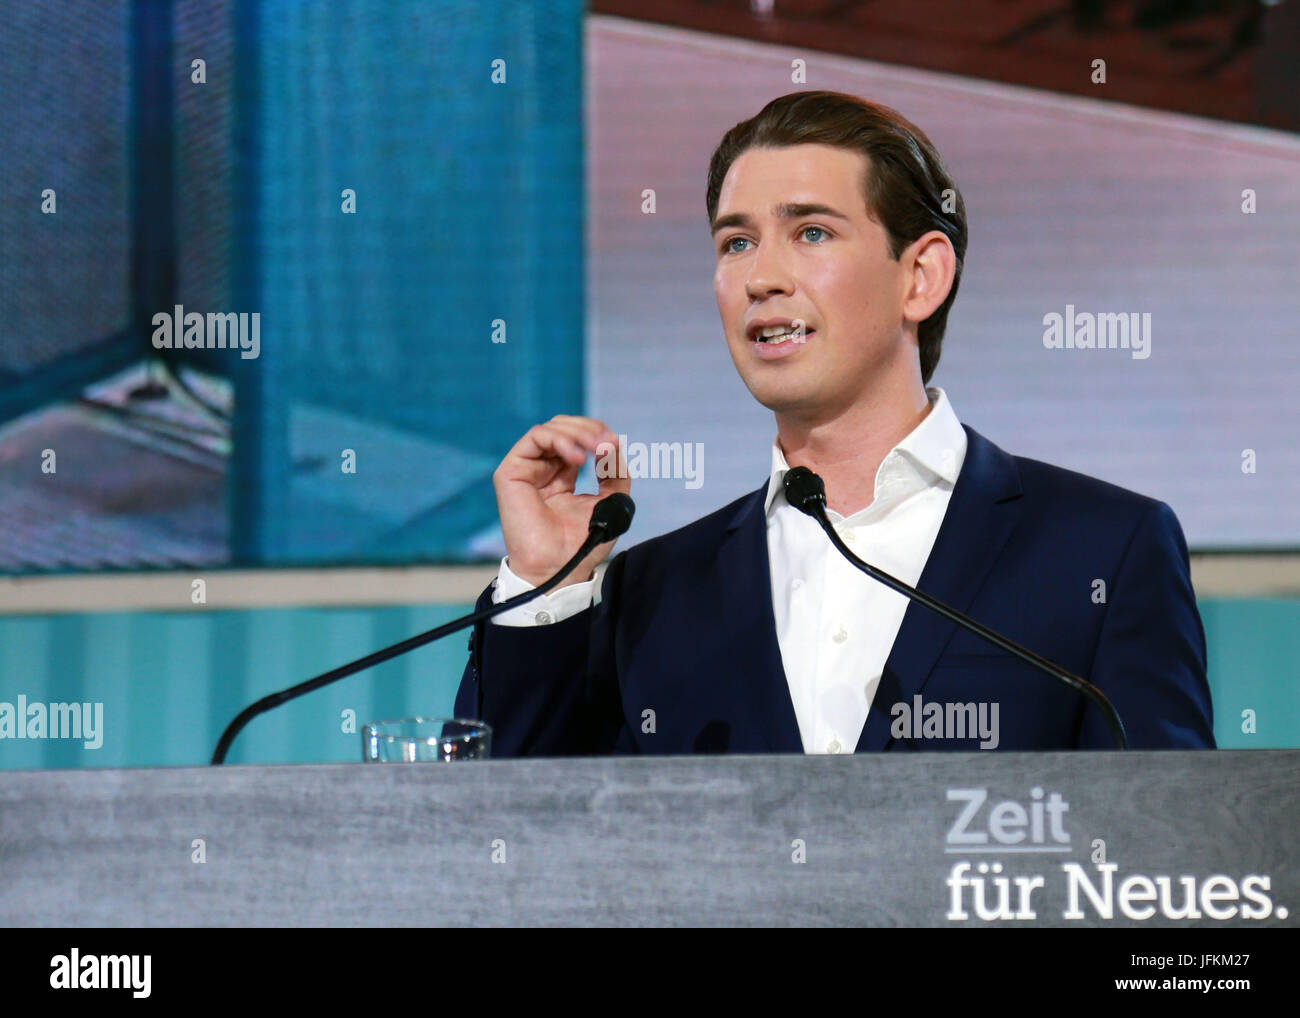 Linz, Austria. 1st July, 2017. Austrian Foreign Minister Sebastian Kurz addresses the national congress of the People's Party in Linz, Austria, July 1, 2017. Thirty-year-old Sebastian Kurz was elected as the leader of the People's Party at the congress in Linz on Saturday. Credit: Pan Xu/Xinhua/Alamy Live News Stock Photo